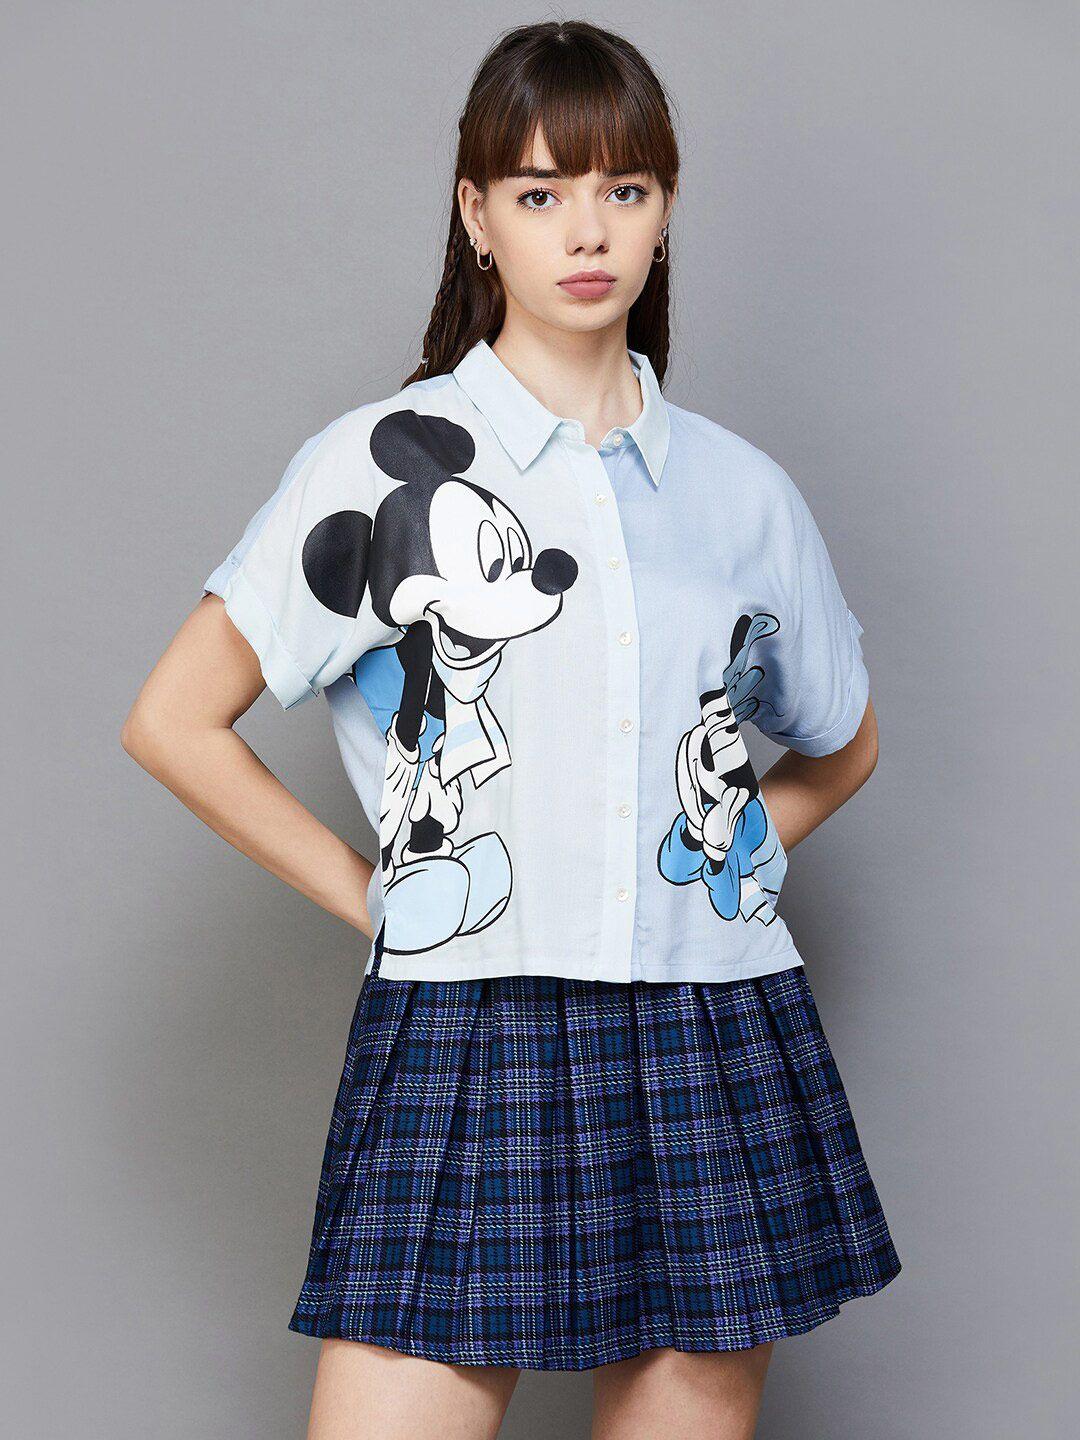 ginger-by-lifestyle-mickey-&-minnie-printed-casual-shirt